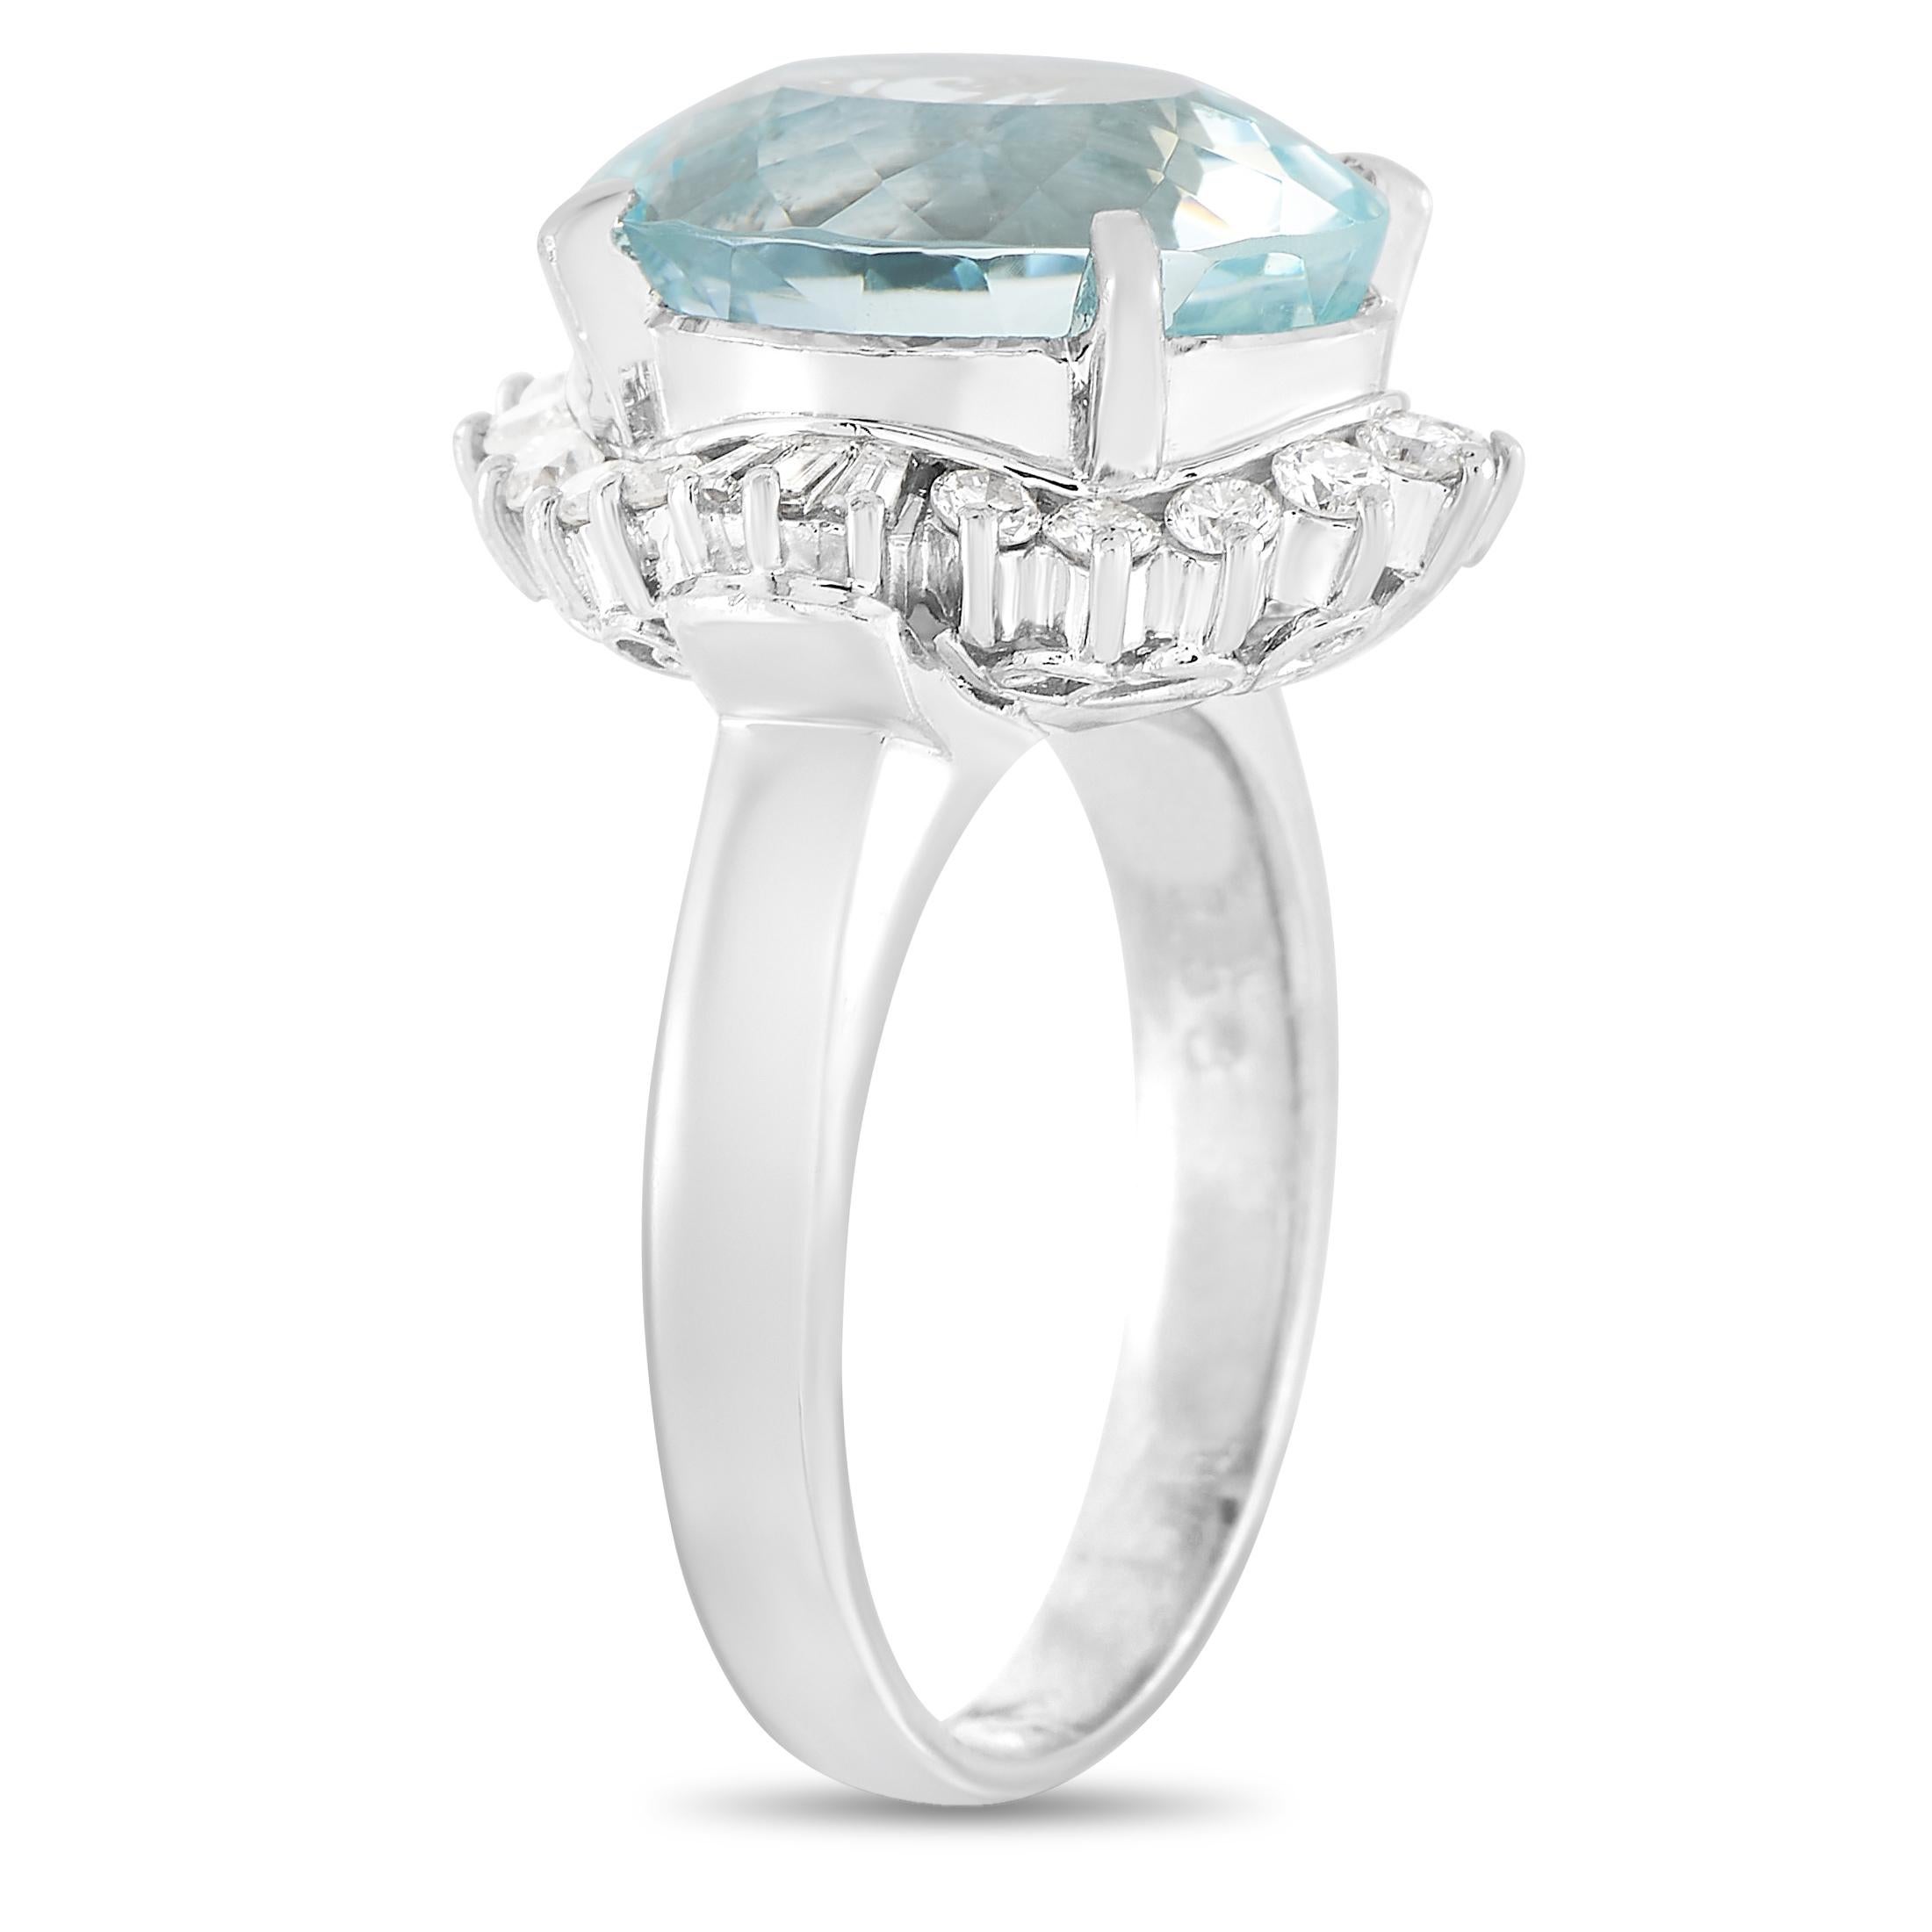 This gorgeous LB Exclusive Platinum 0.53 ct Diamond and Aquamarine Ring is made with platinum and set with a total of 0.53 carats of baguette and round diamonds forming a halo around the 5.55 carat oval aquamarine center stone. The ring has a band